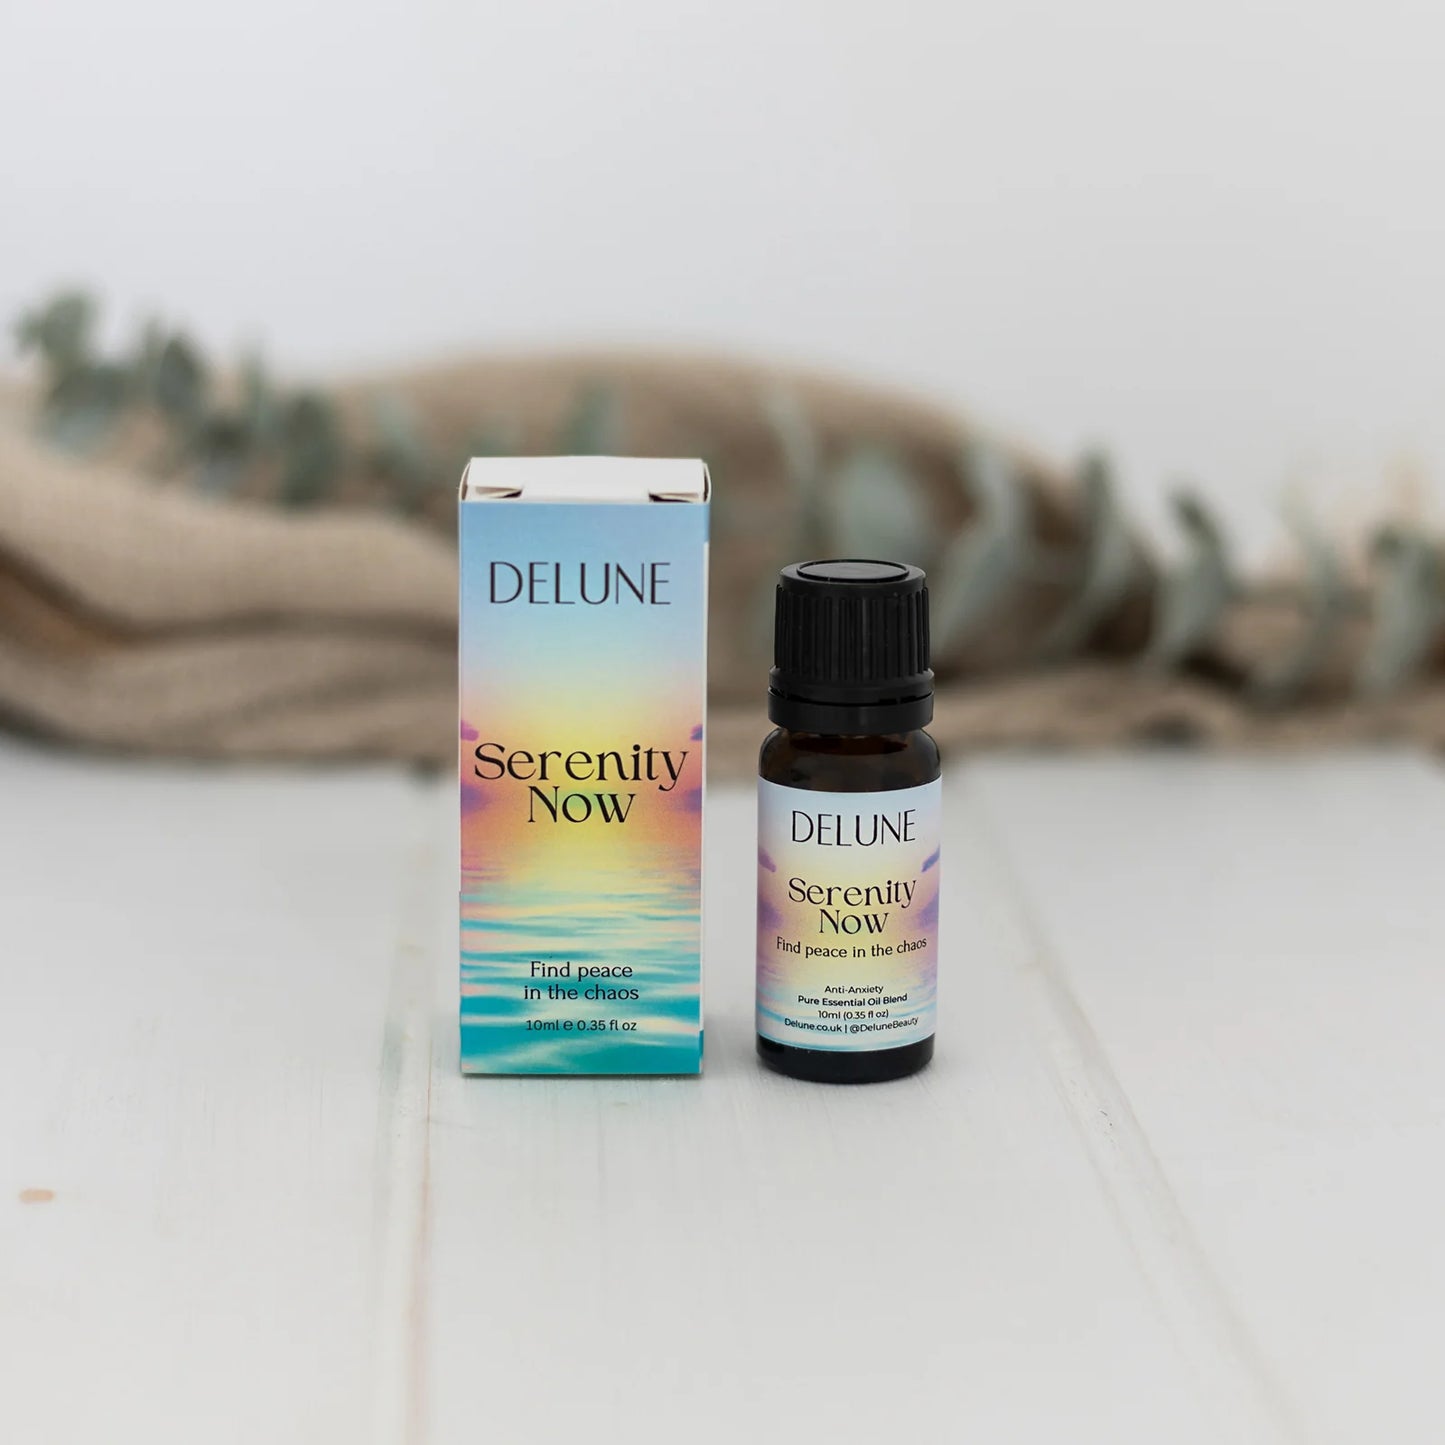 Serenity Now - Anti-Anxiety - Wellbeing Blend